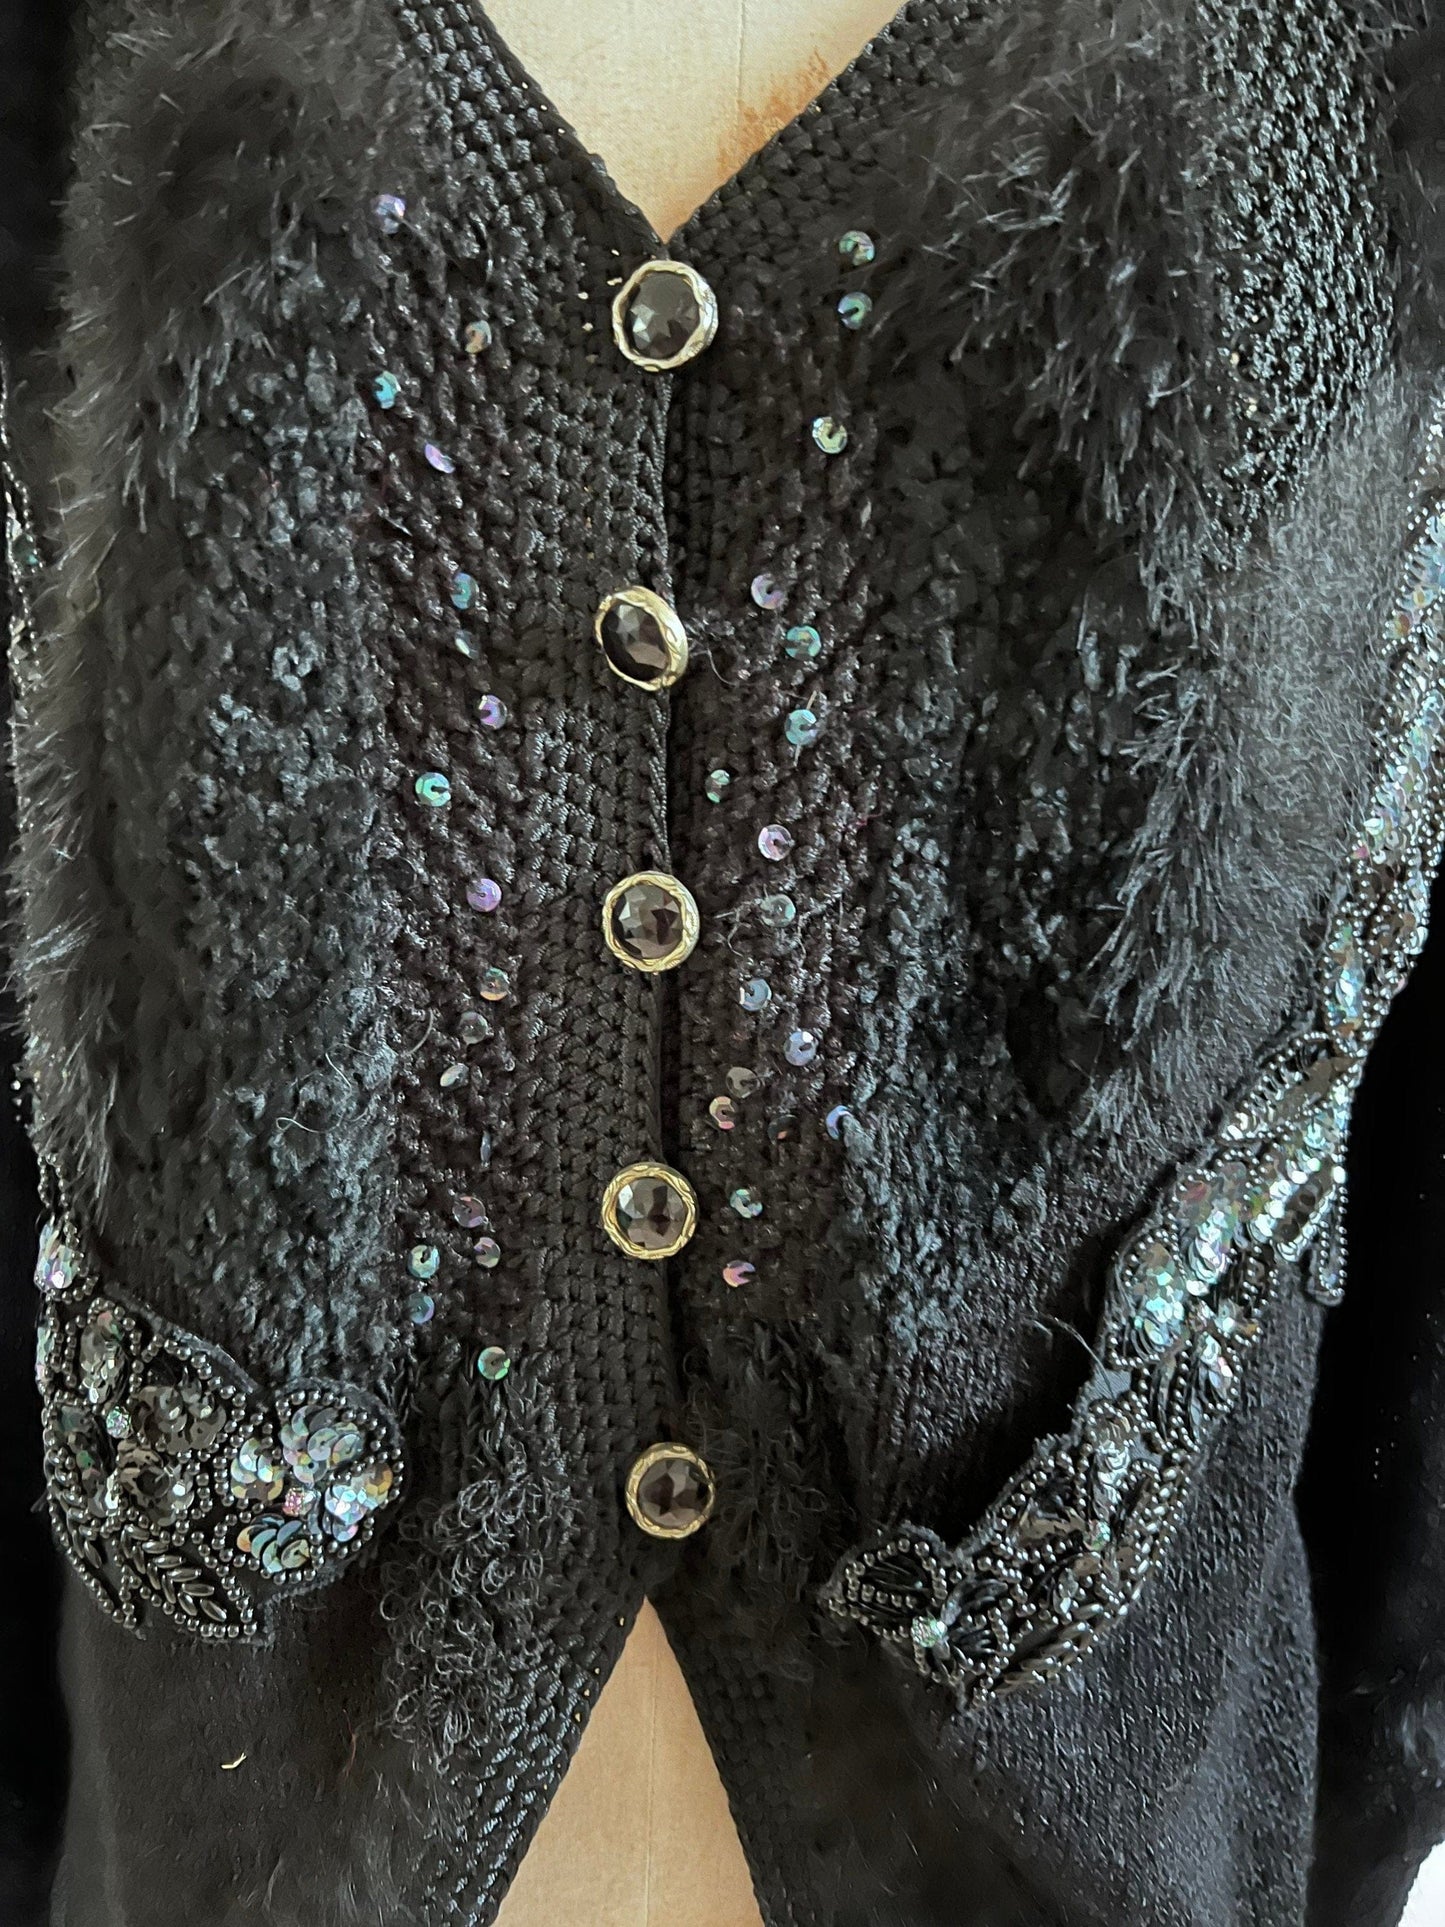 80s Black Vintage cardigan with beading and mohair and chunky button detail UK12